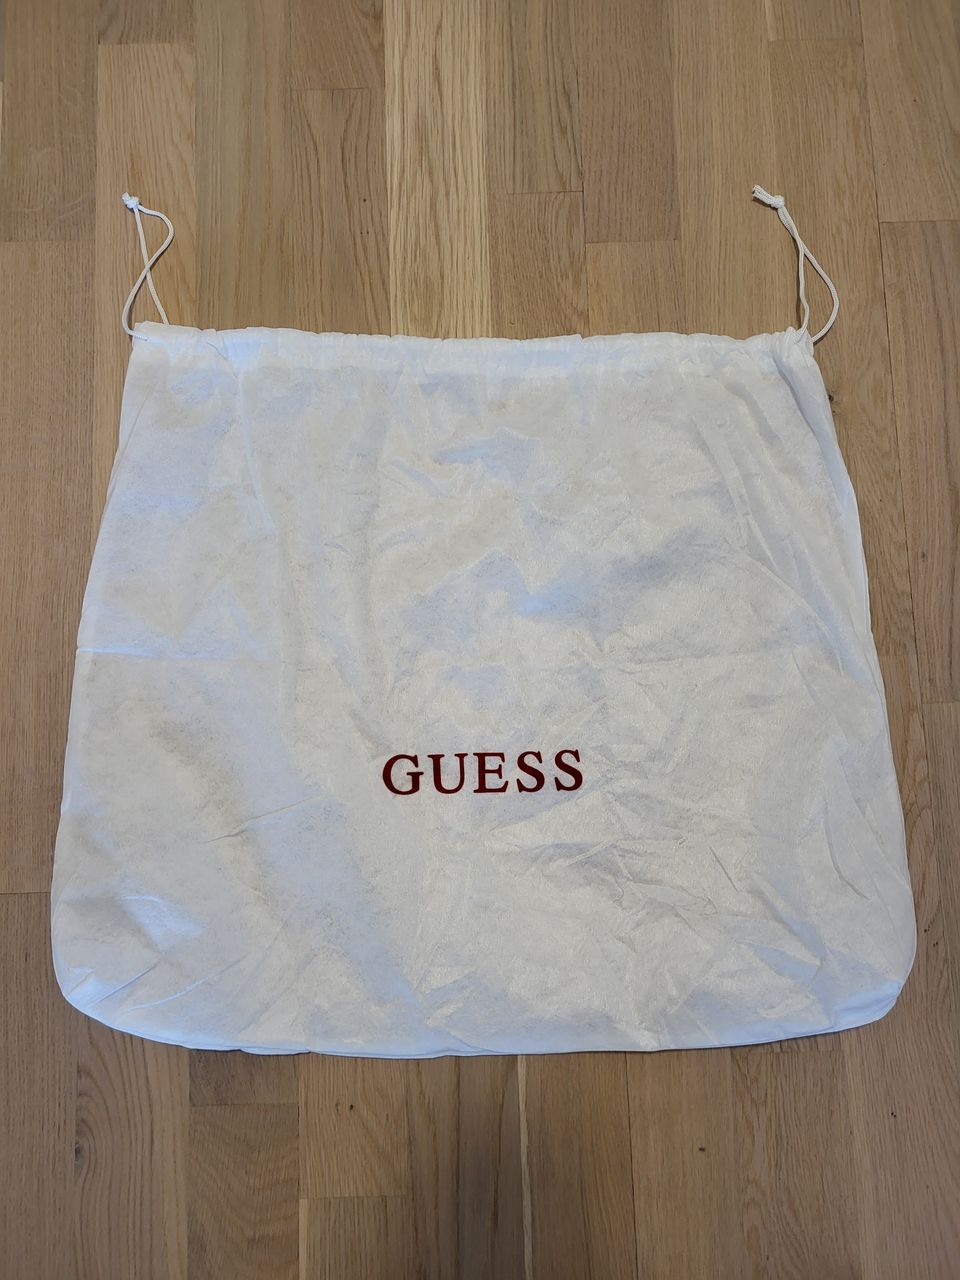 Uusi iso Guess Dust Bag